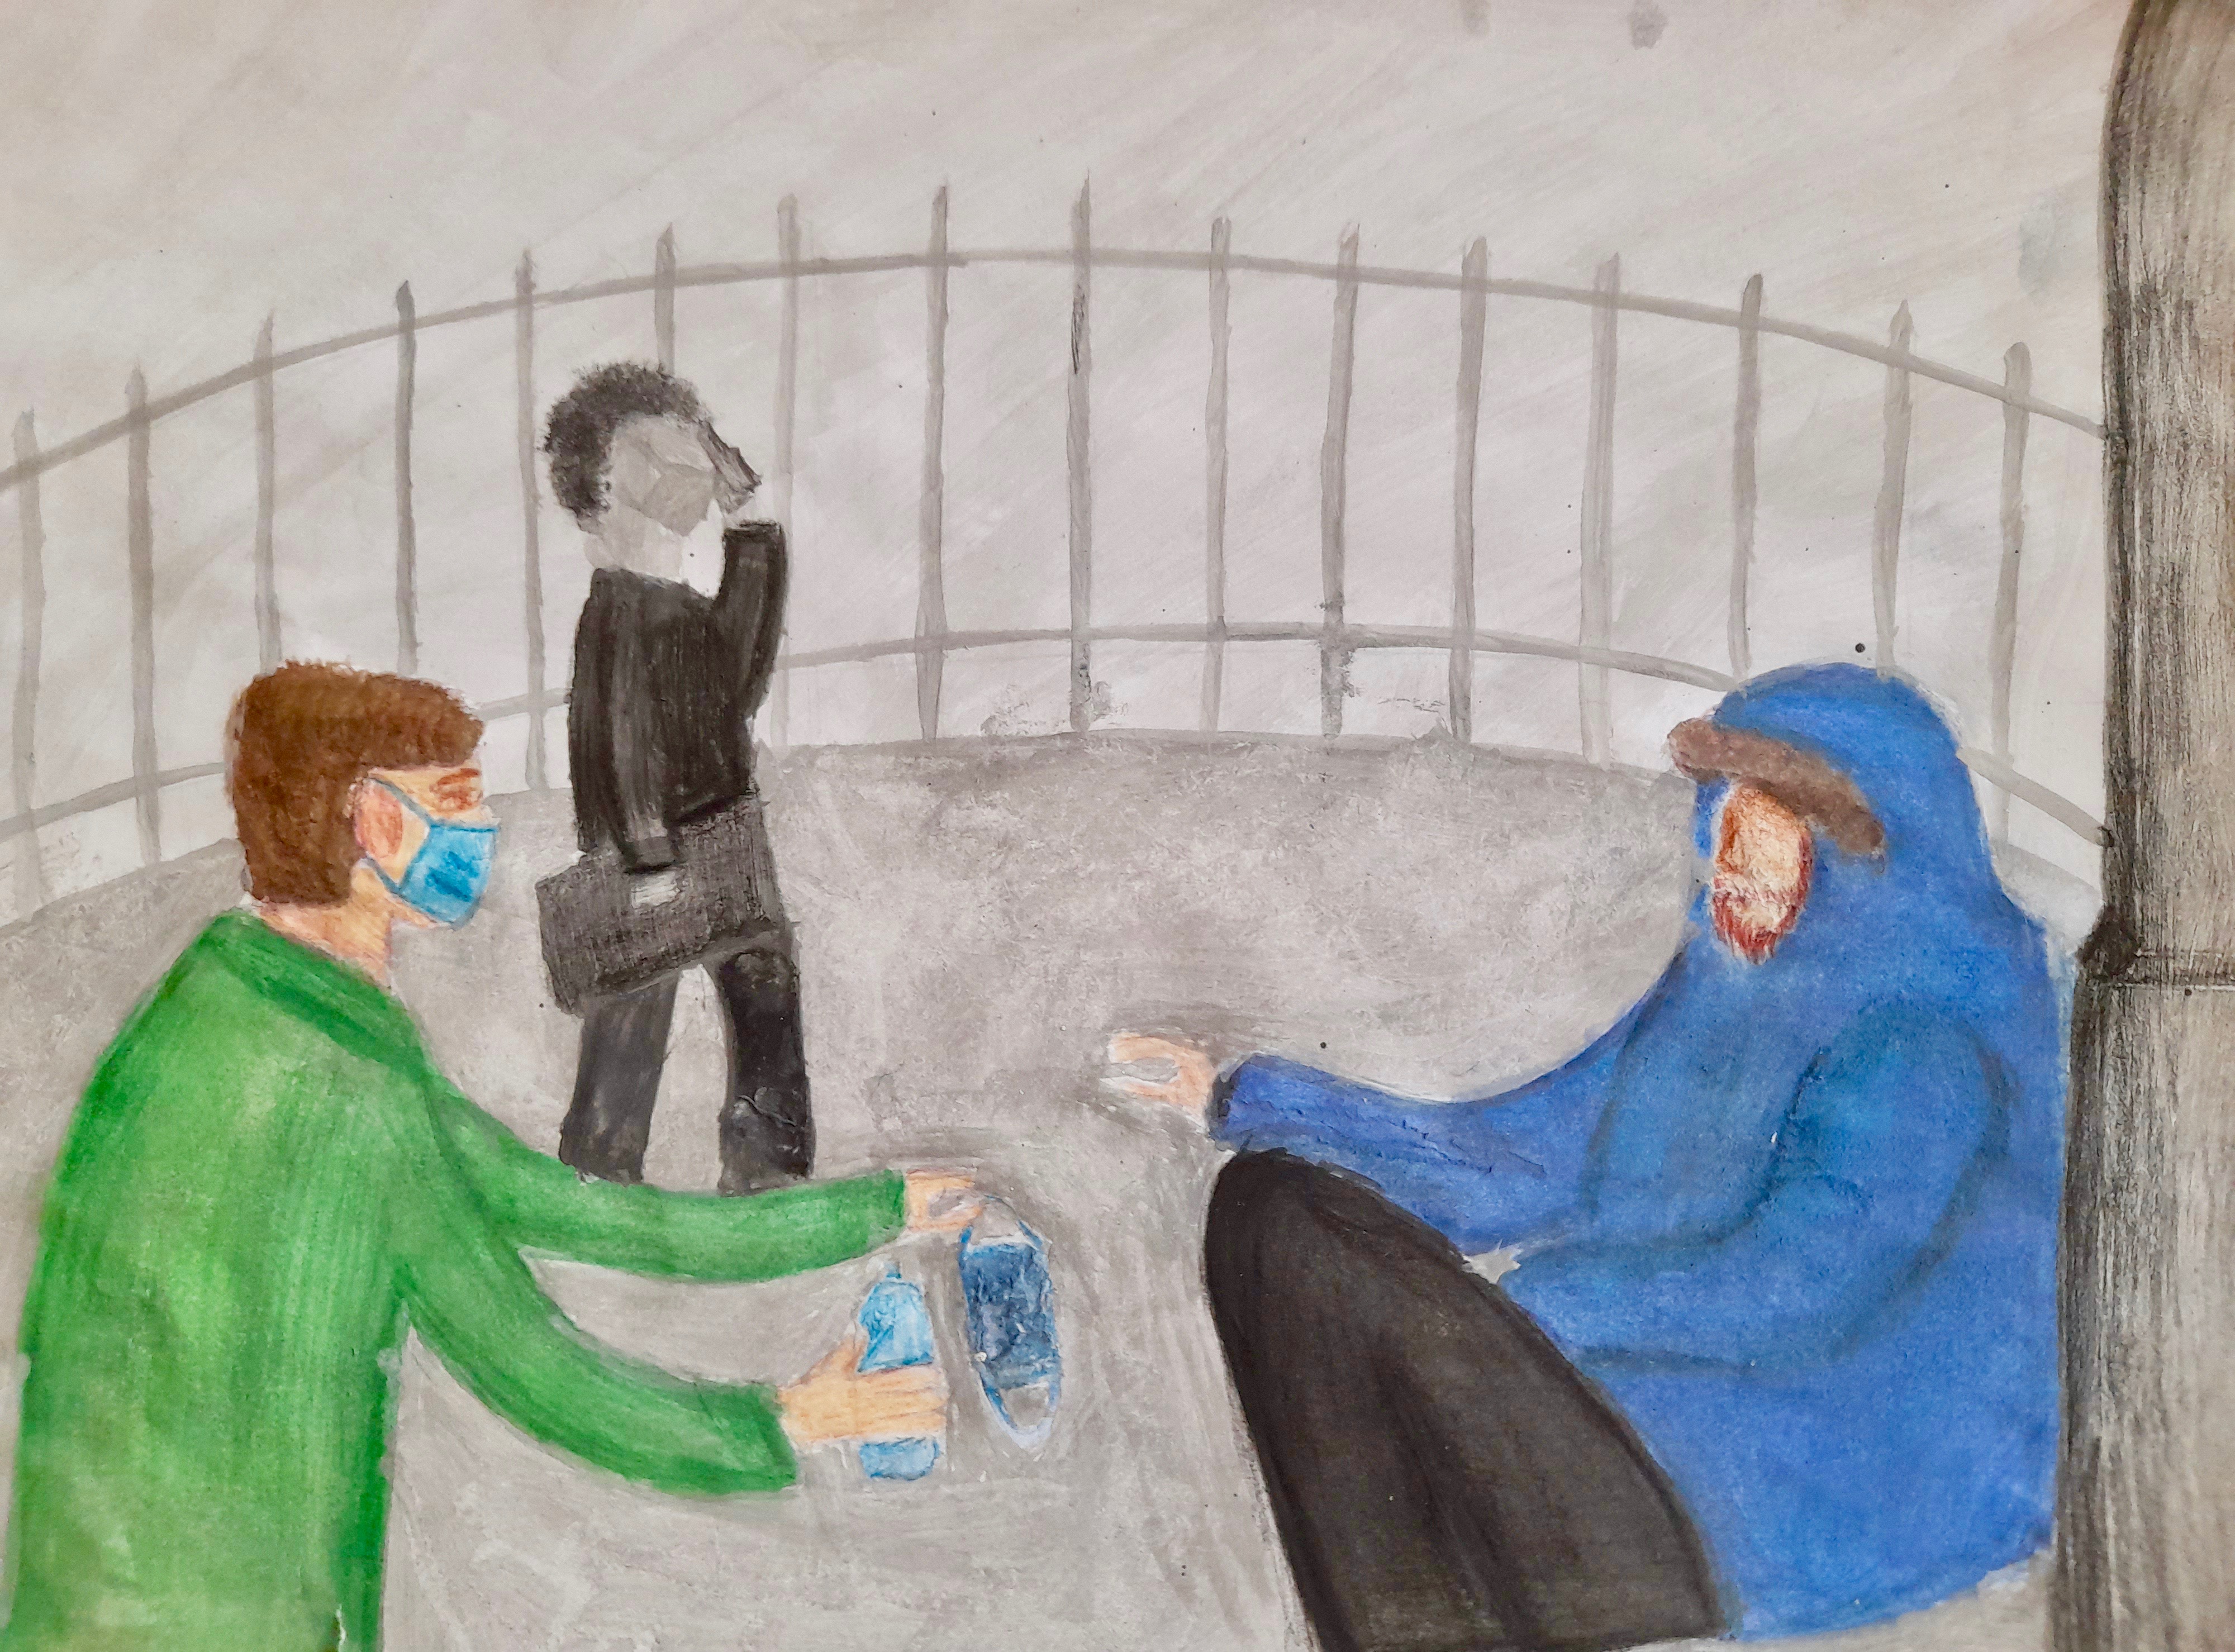 'Homeless in a pandemic' by Amy (16) from Kerry